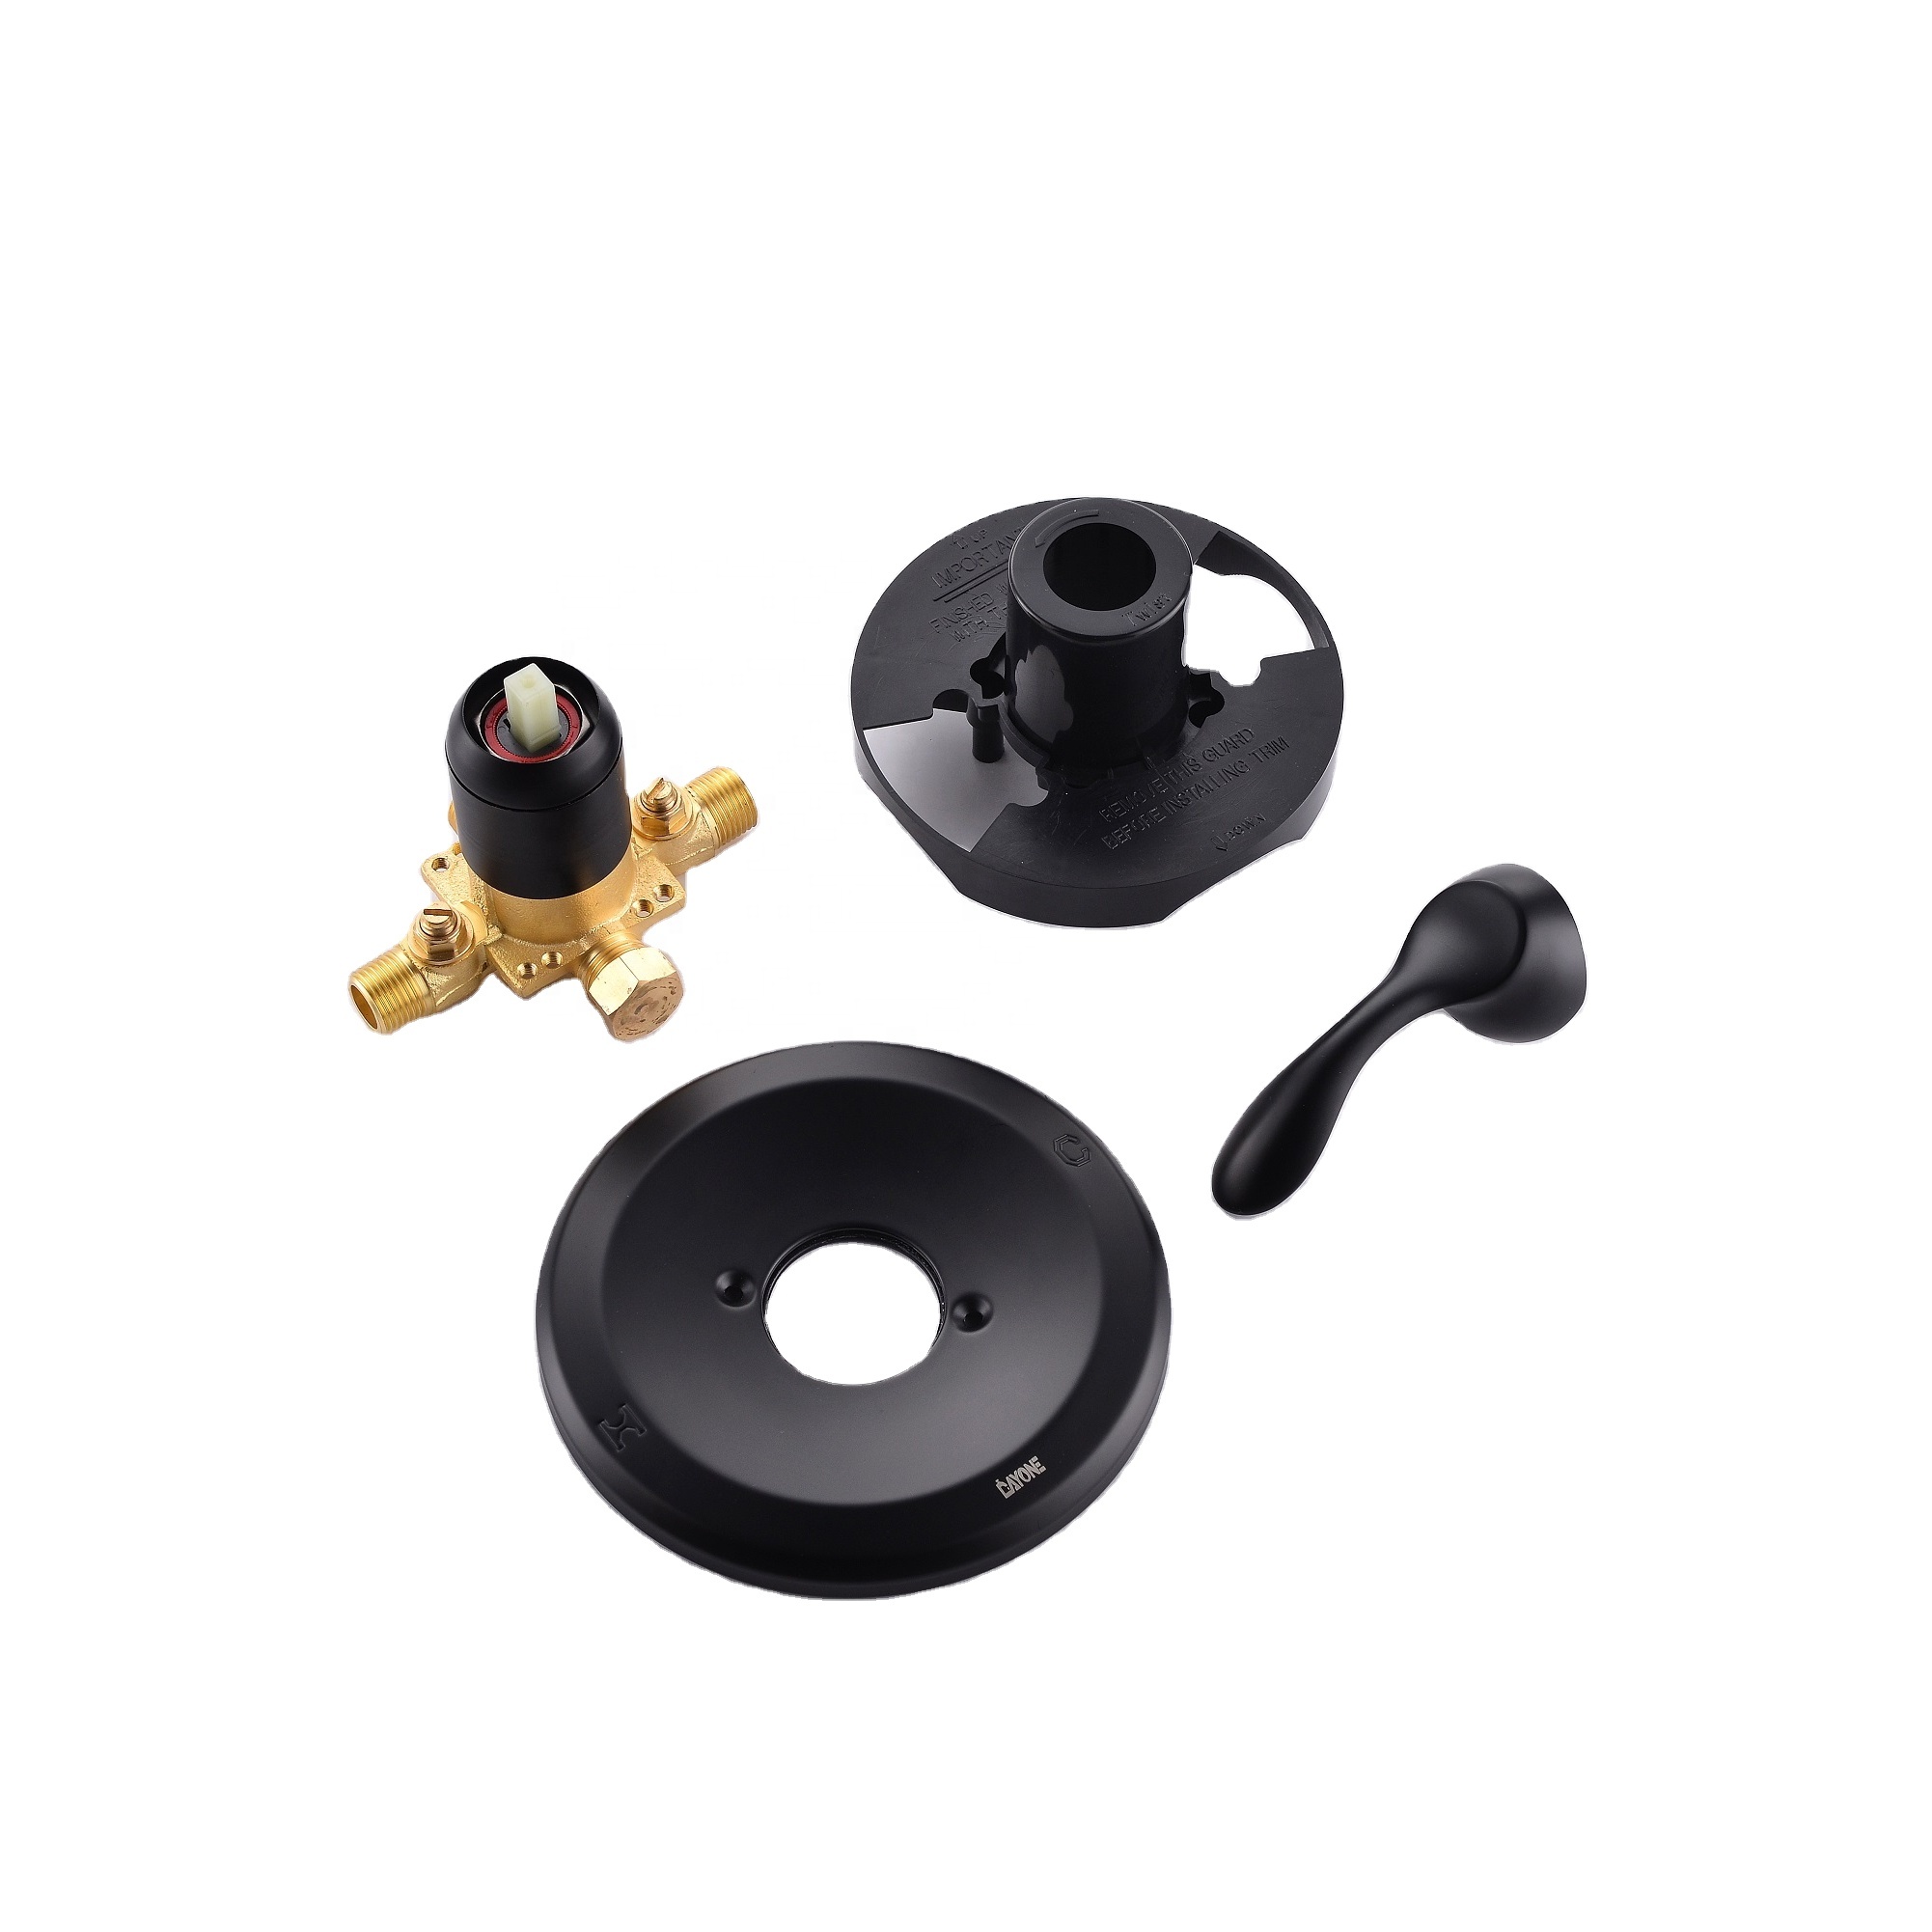 Superior Quality Shower Faucet Bathroom Black Shower Head And Faucet Set For Tub